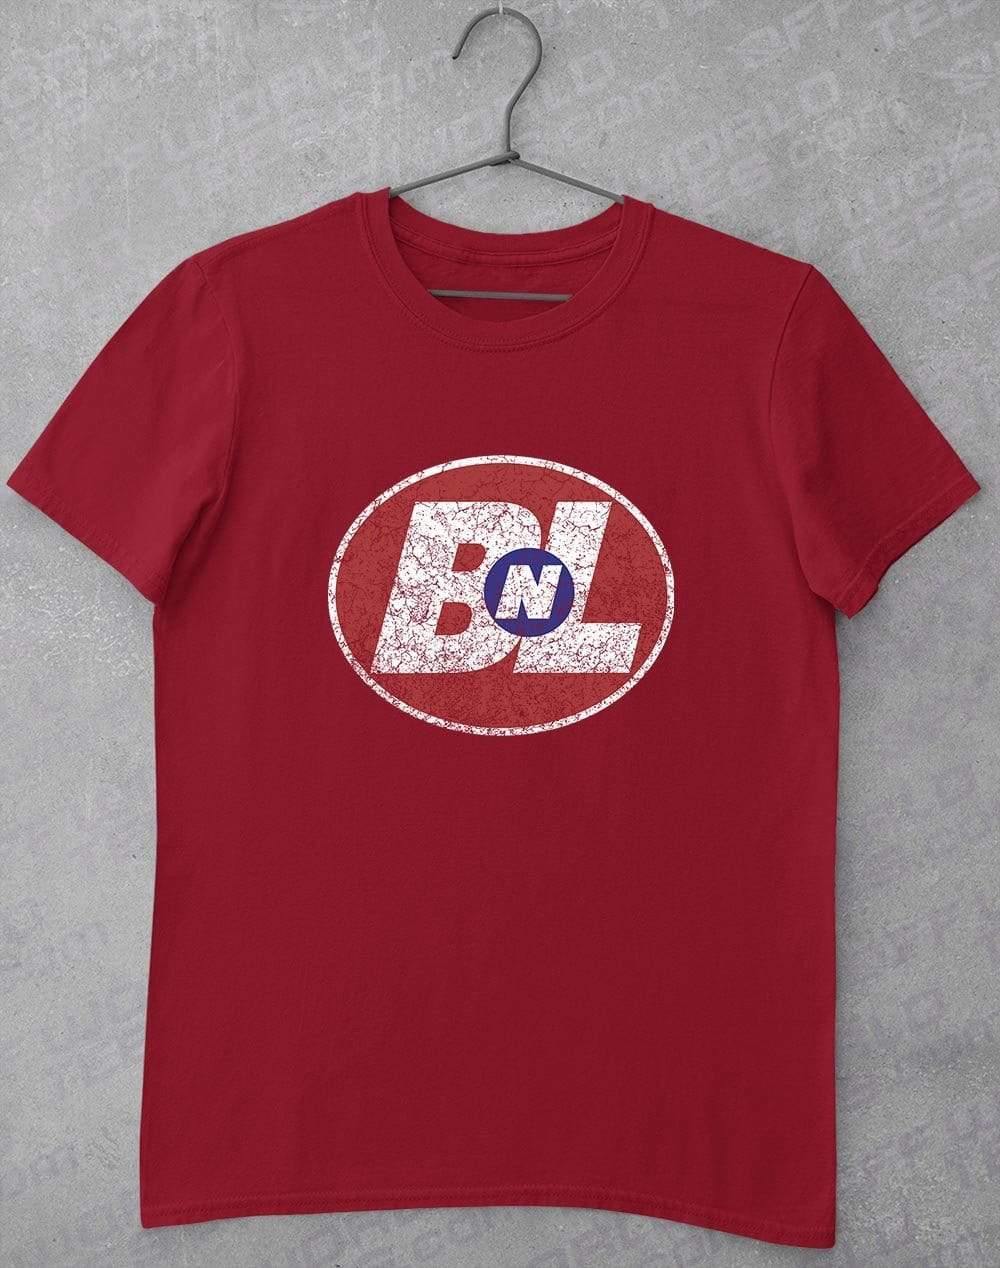 Buy N Large T-Shirt S / Cardinal Red  - Off World Tees